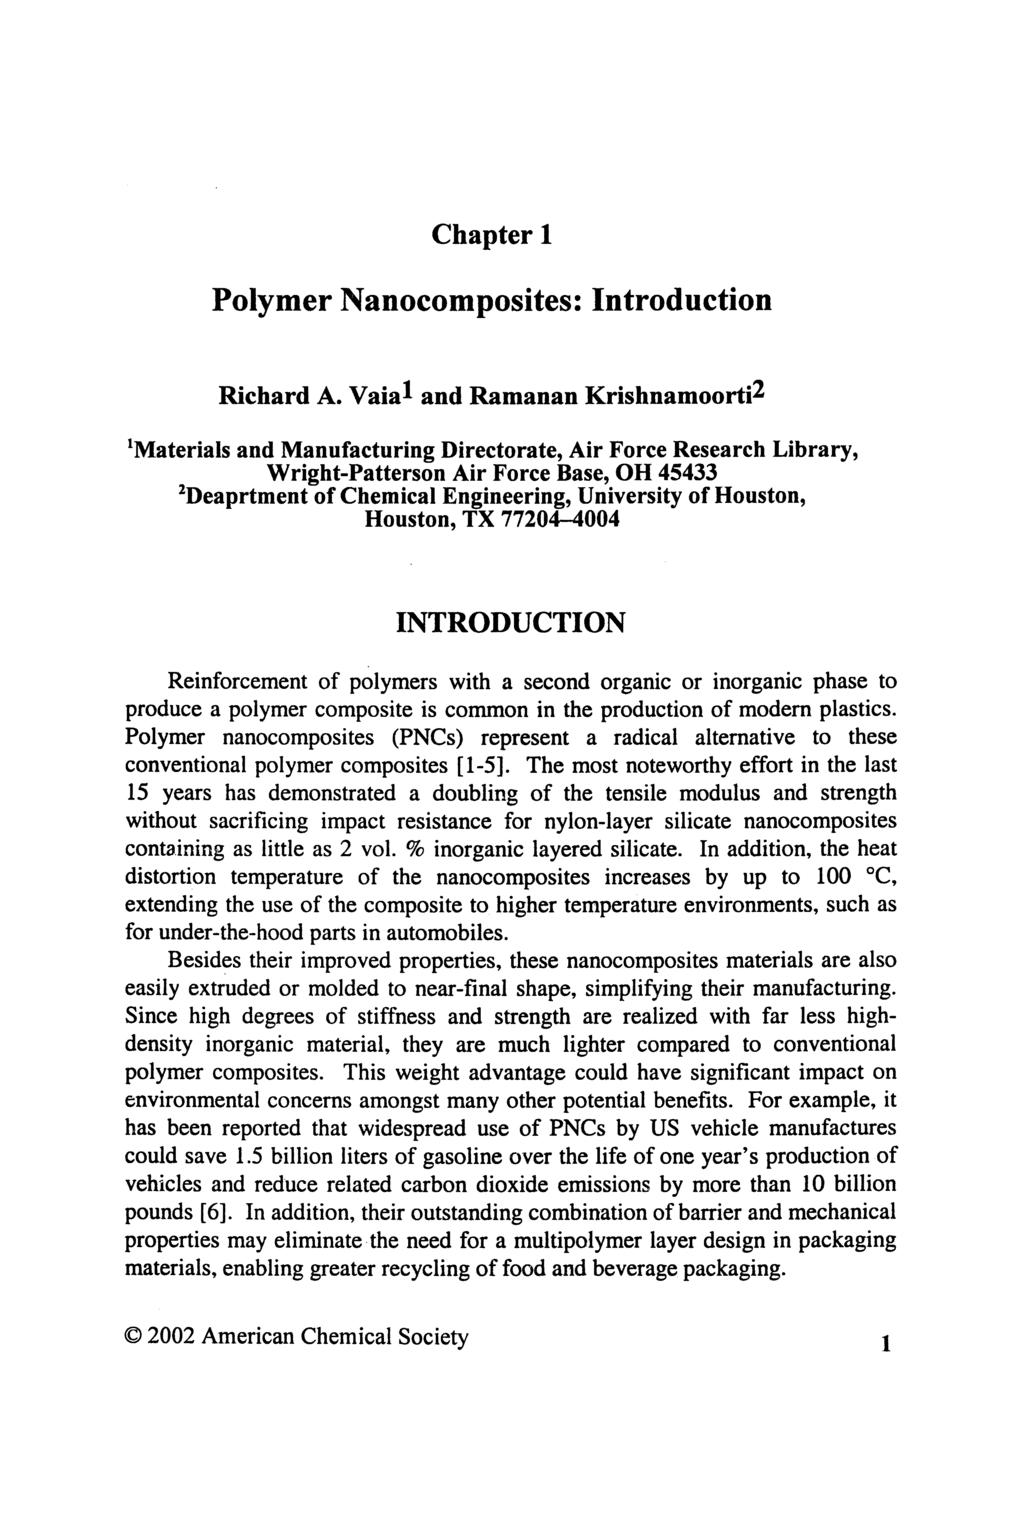 Chapter 1 Polymer Nanocomposites: Introduction Downloaded via 148.251.232.83 on April 5, 2019 at 22:23:00 (UTC). See https://pubs.acs.